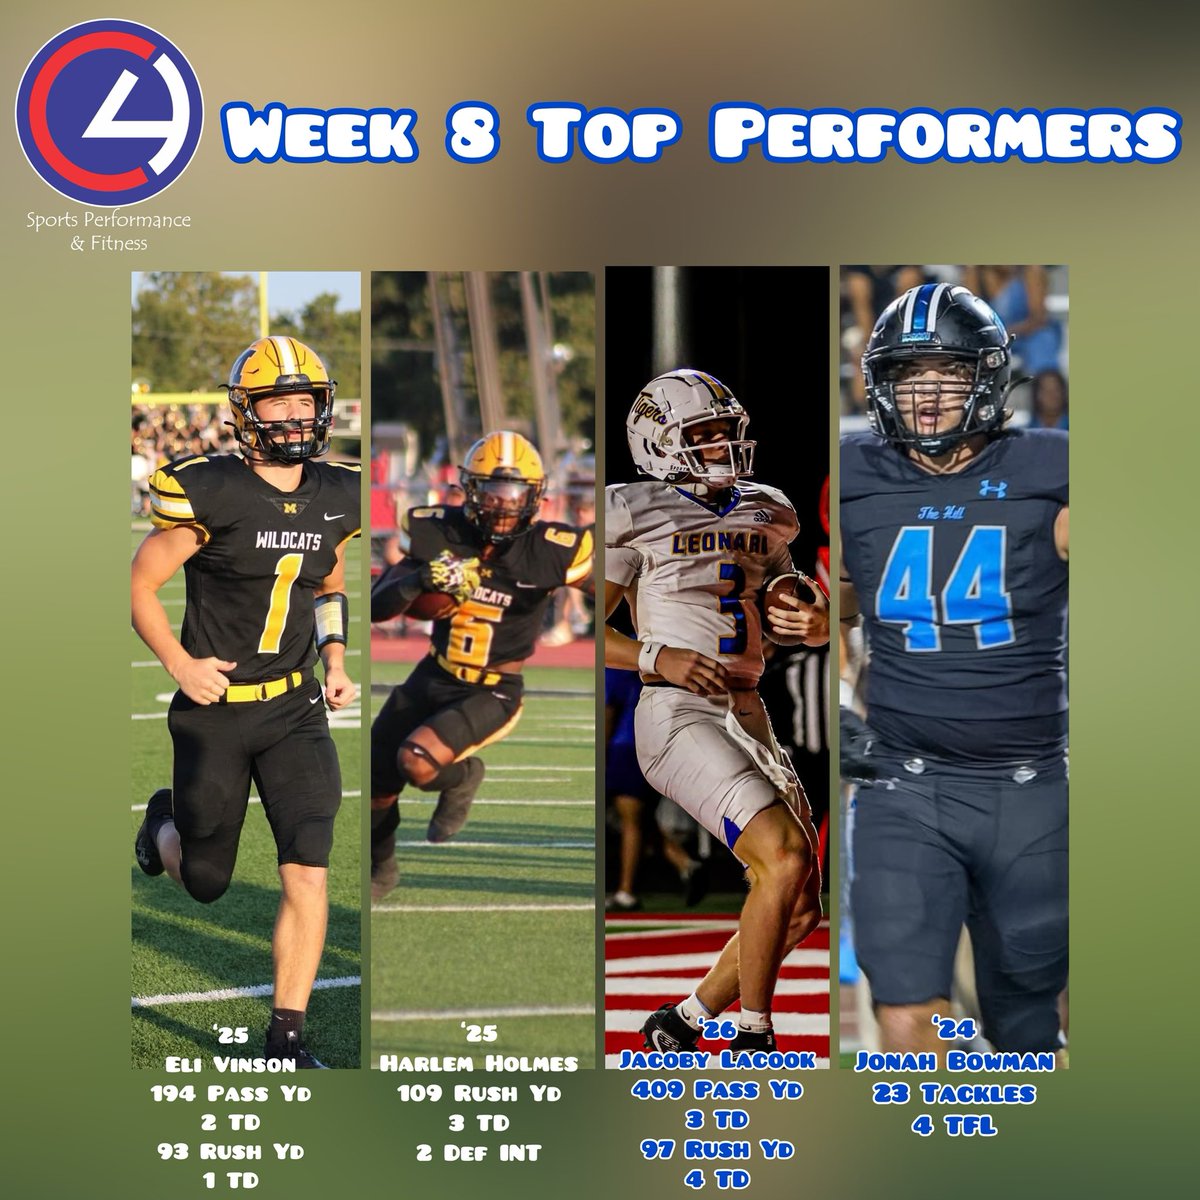 🏈🔥 C4 Week 8 Top Performers 🐯’25 @EliVinson6 🐯 ‘25 @harlemholmes7 🐅 ‘26 @LacookJacoby 🦅 ‘24 @JonahhBowman 3⭐️ ( @AF_Football Commit) #C4Family #RecruitTEXOMA #C4Football